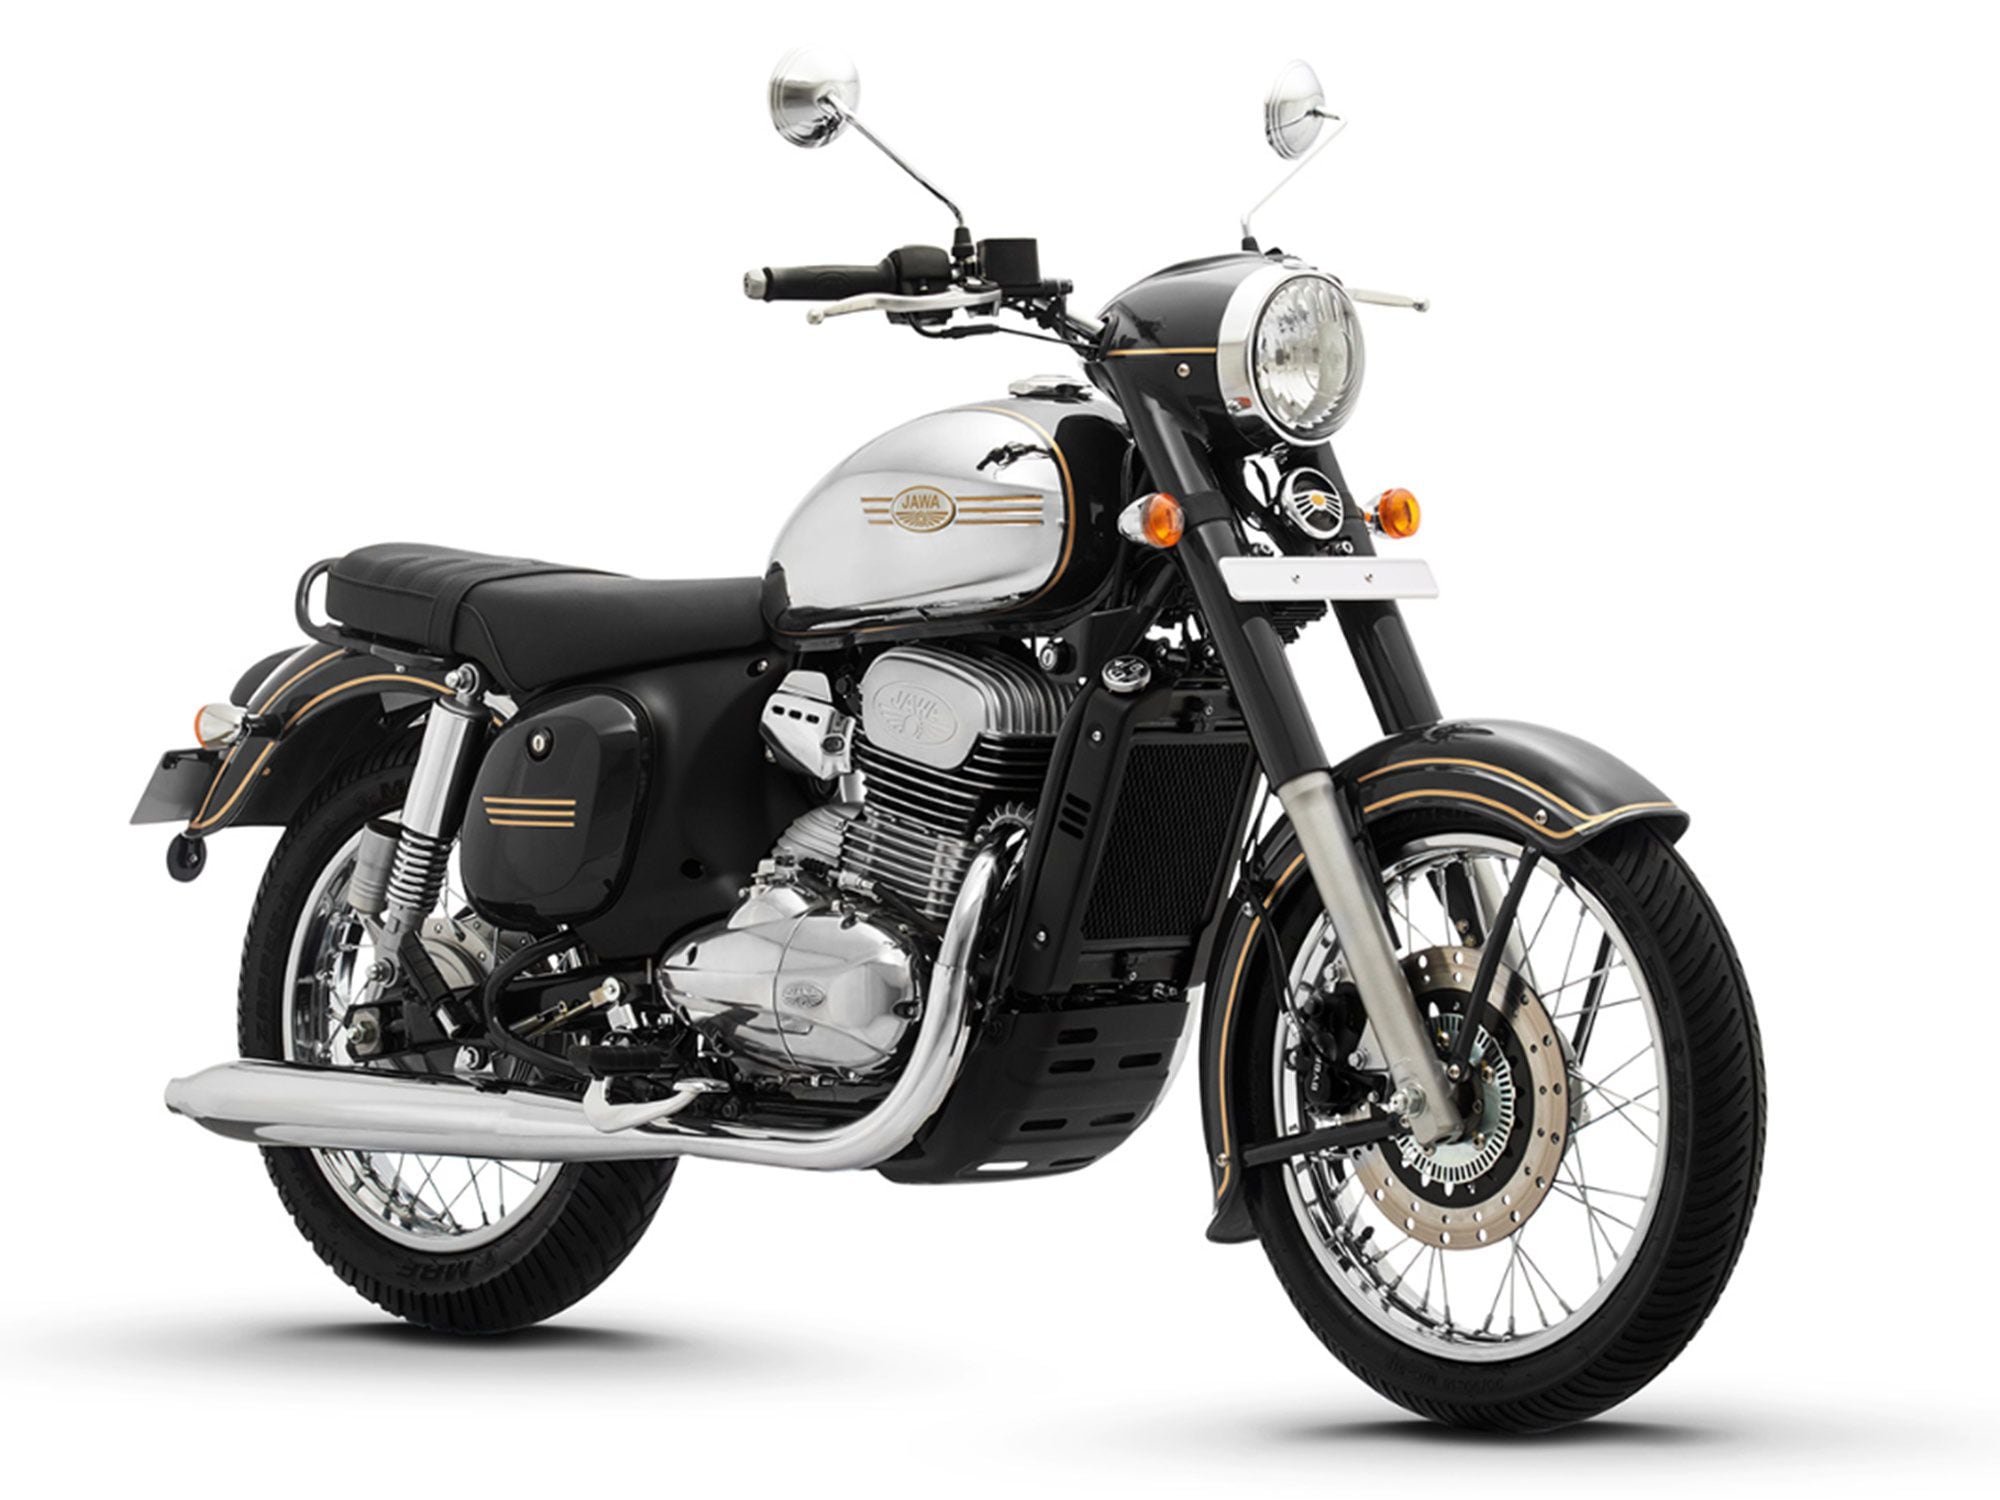 Jawa Motorcycles is one of the classic brands recently resurrected in India and being built there by Indian giant Mahindra.